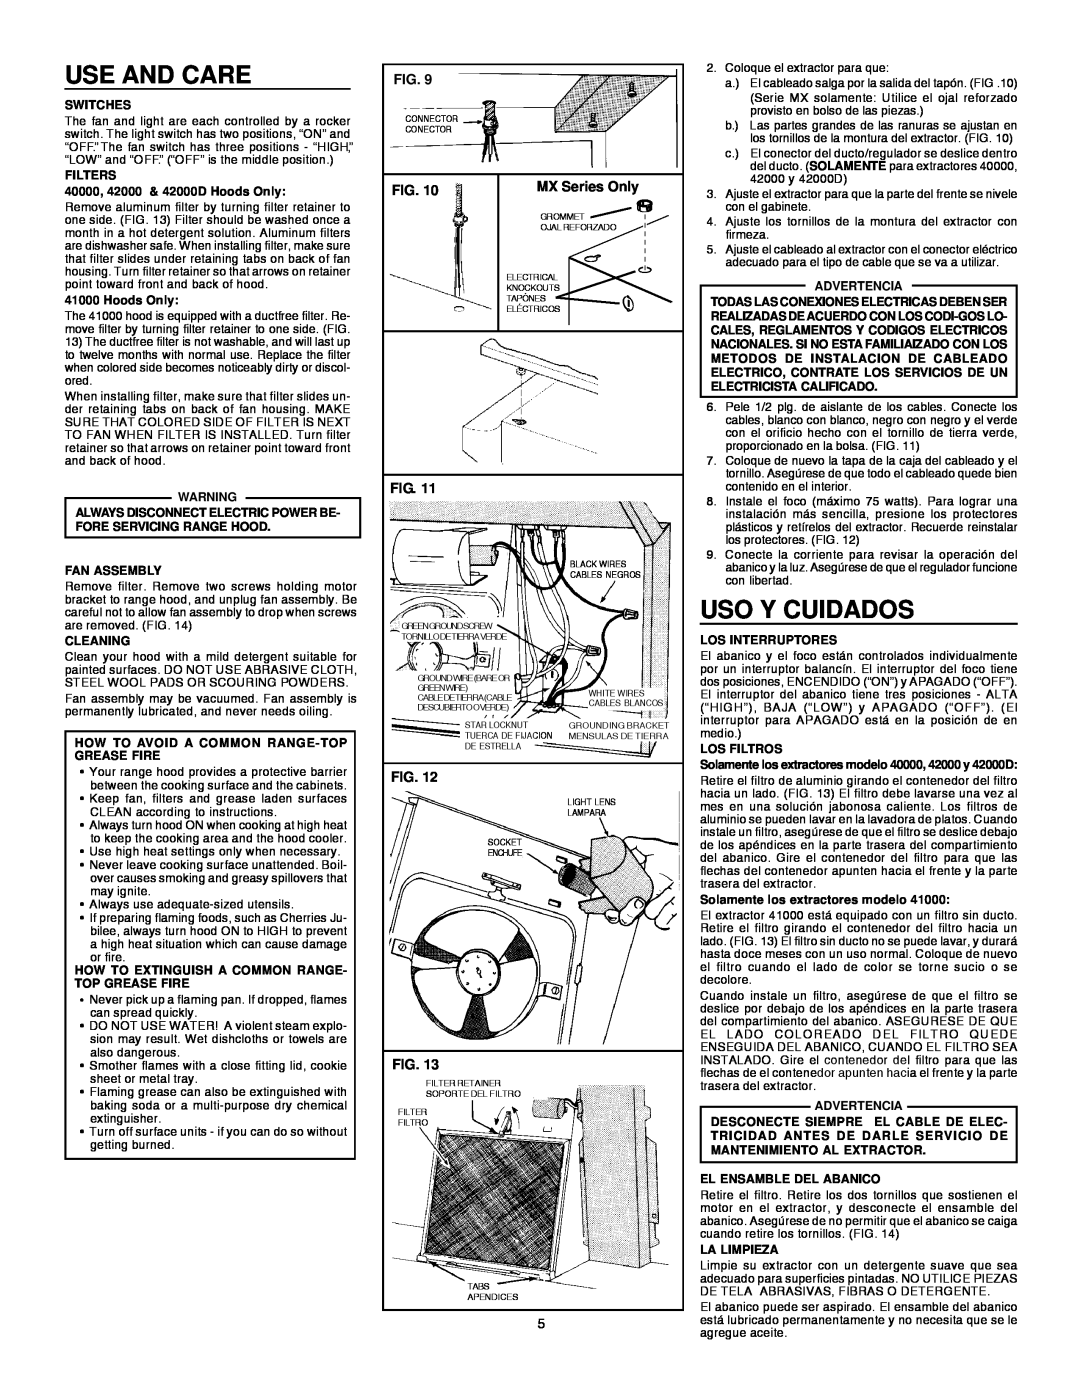 Broan 412401 installation instructions Use And Care, Uso Y Cuidados, MX Series Only 